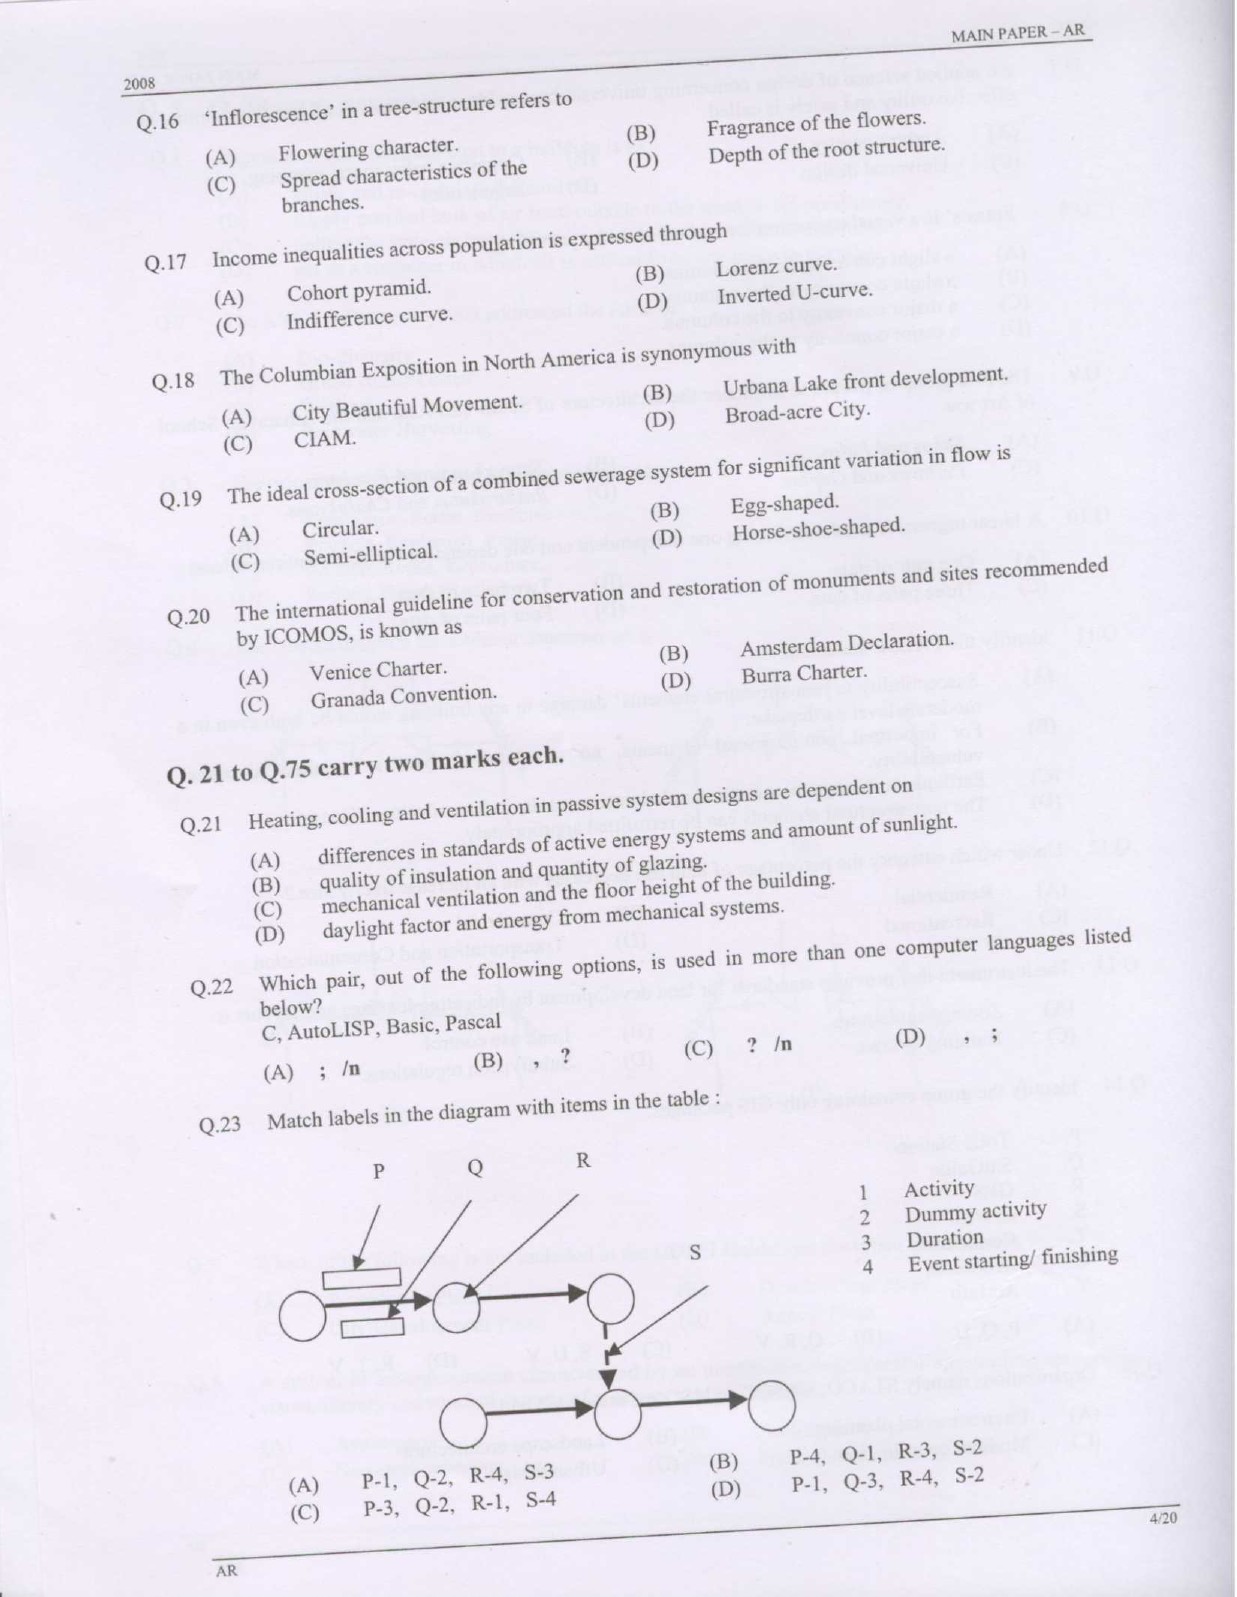 GATE Exam Question Paper 2008 Architecture and Planning 4